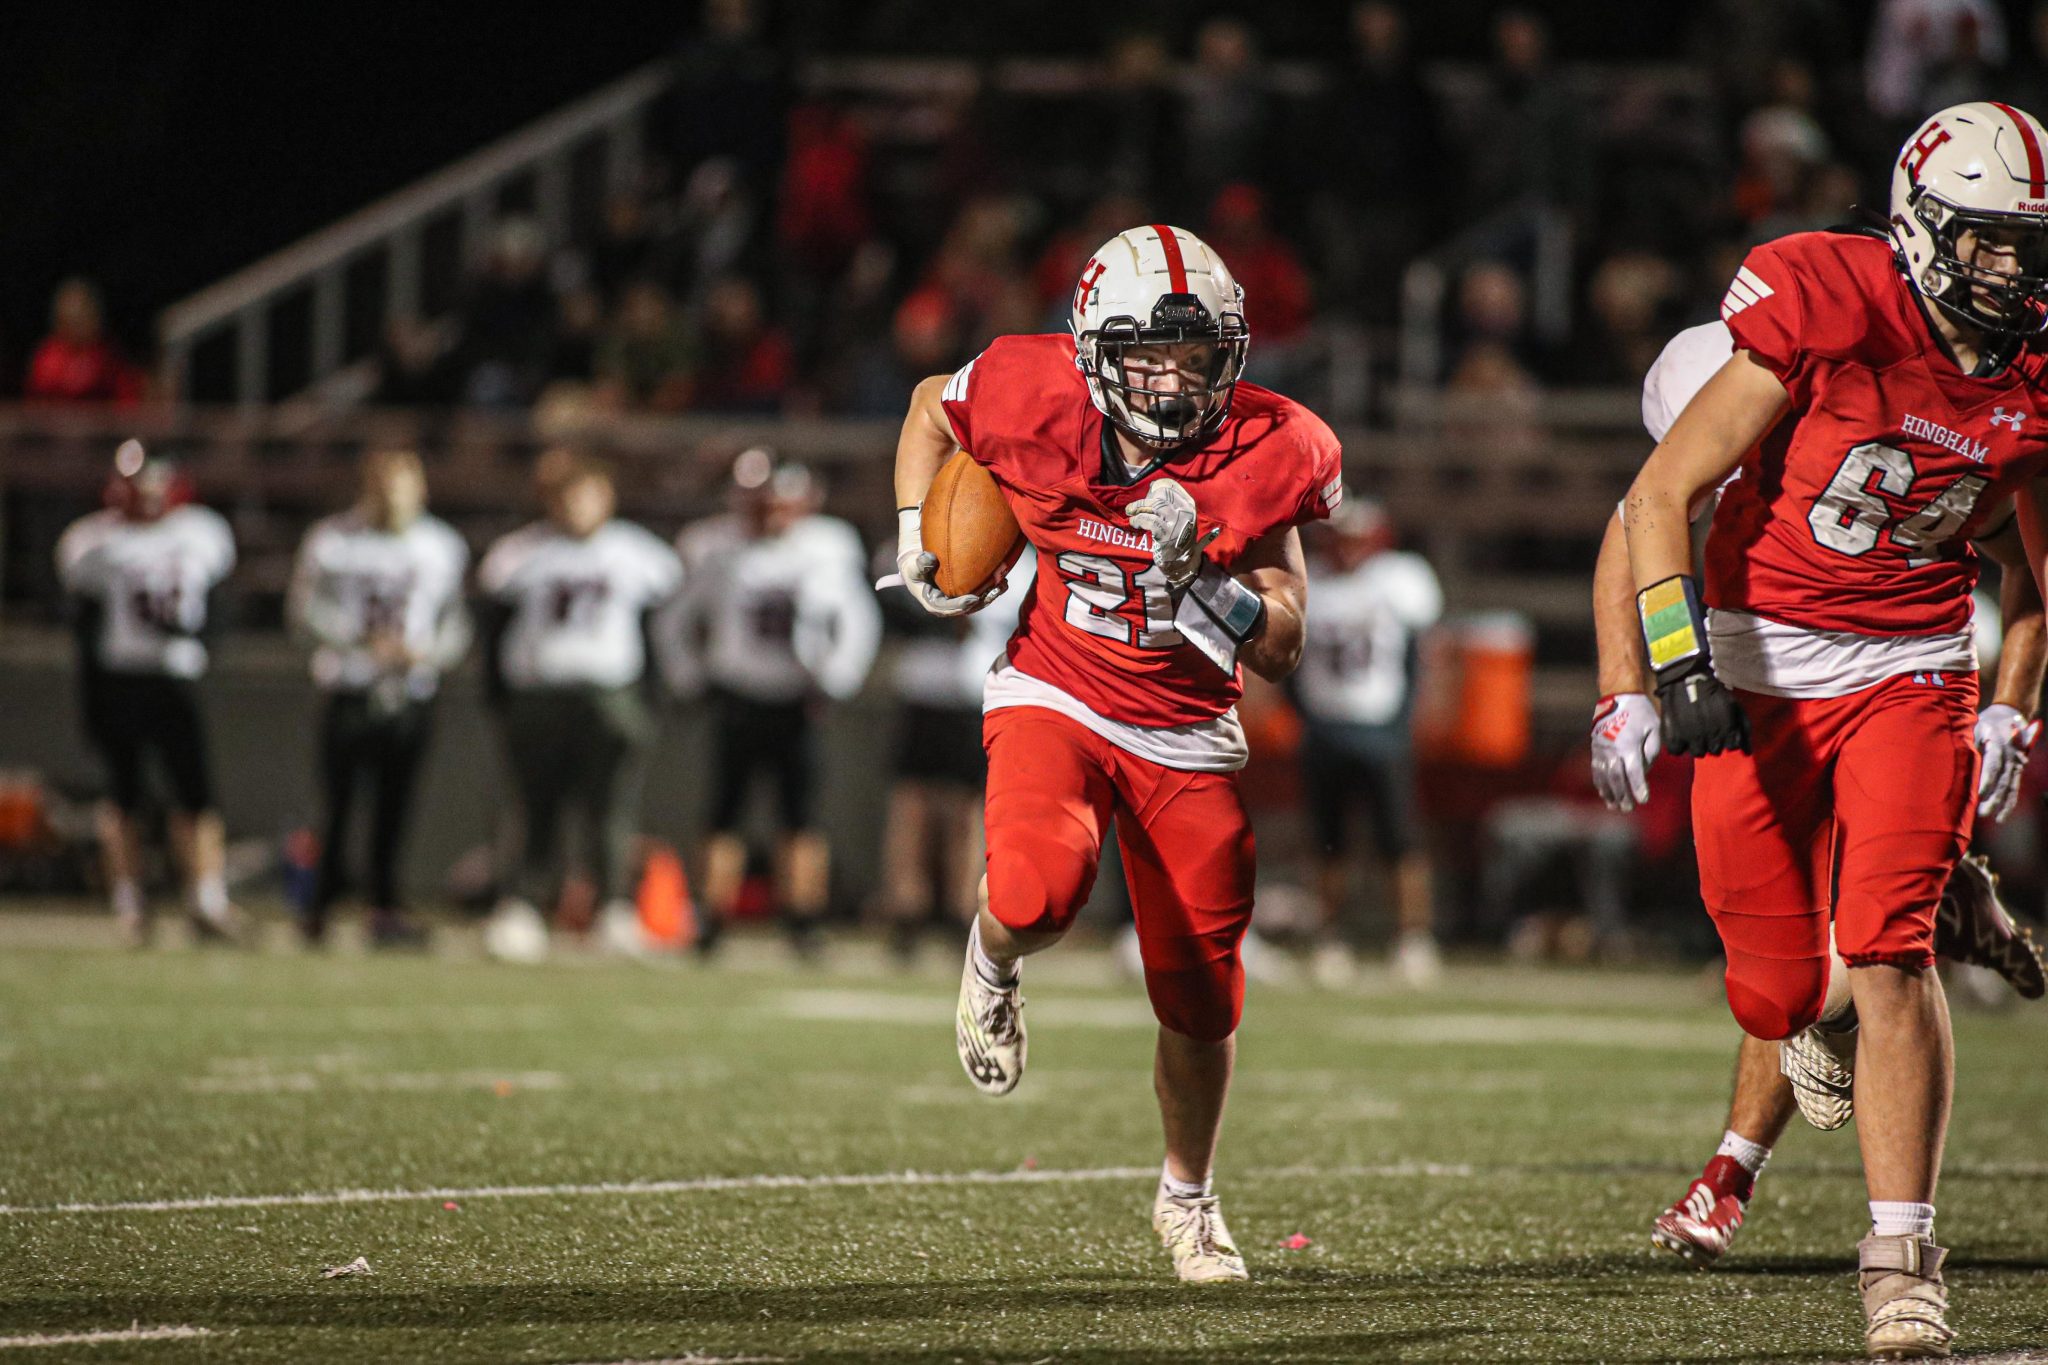 Junior Jeremy Aylward carried the ball 17 times for 133 yards in Hingham's 13-7 win over Whitman-Hanson.